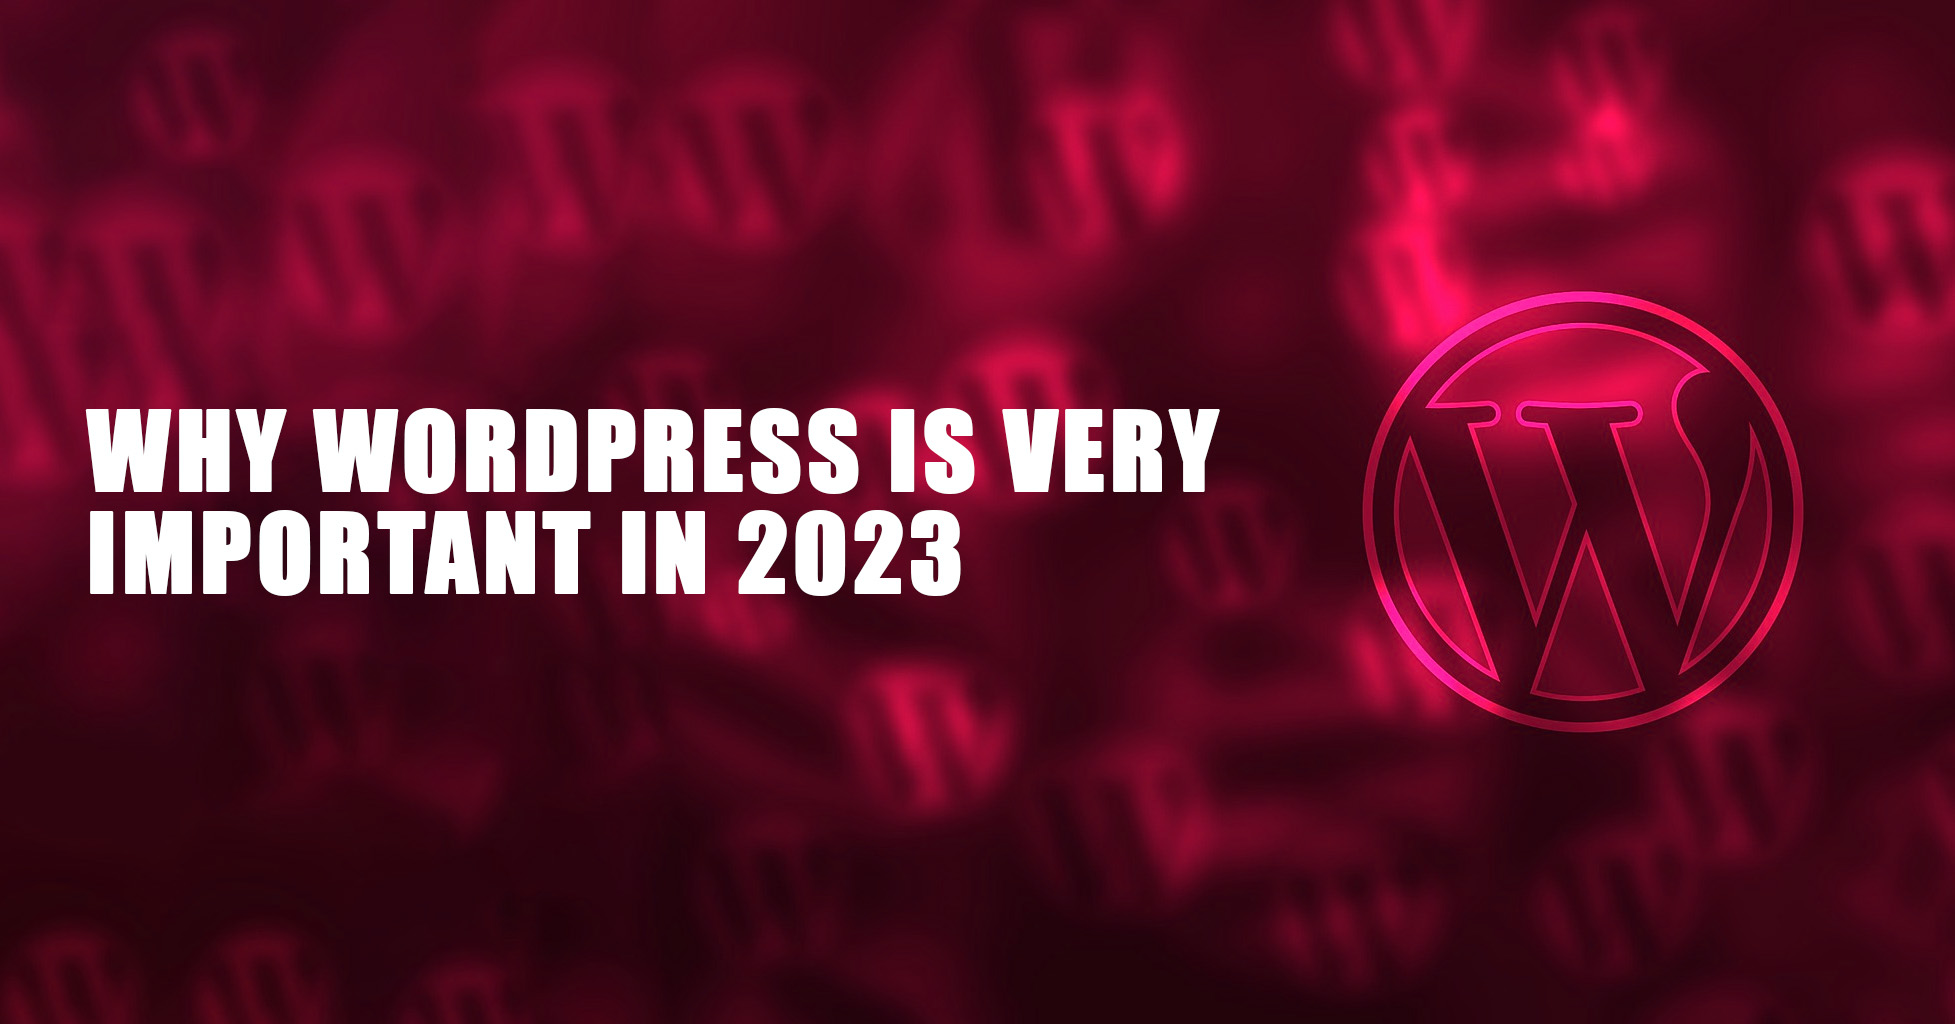 why WordPress is important in 2023